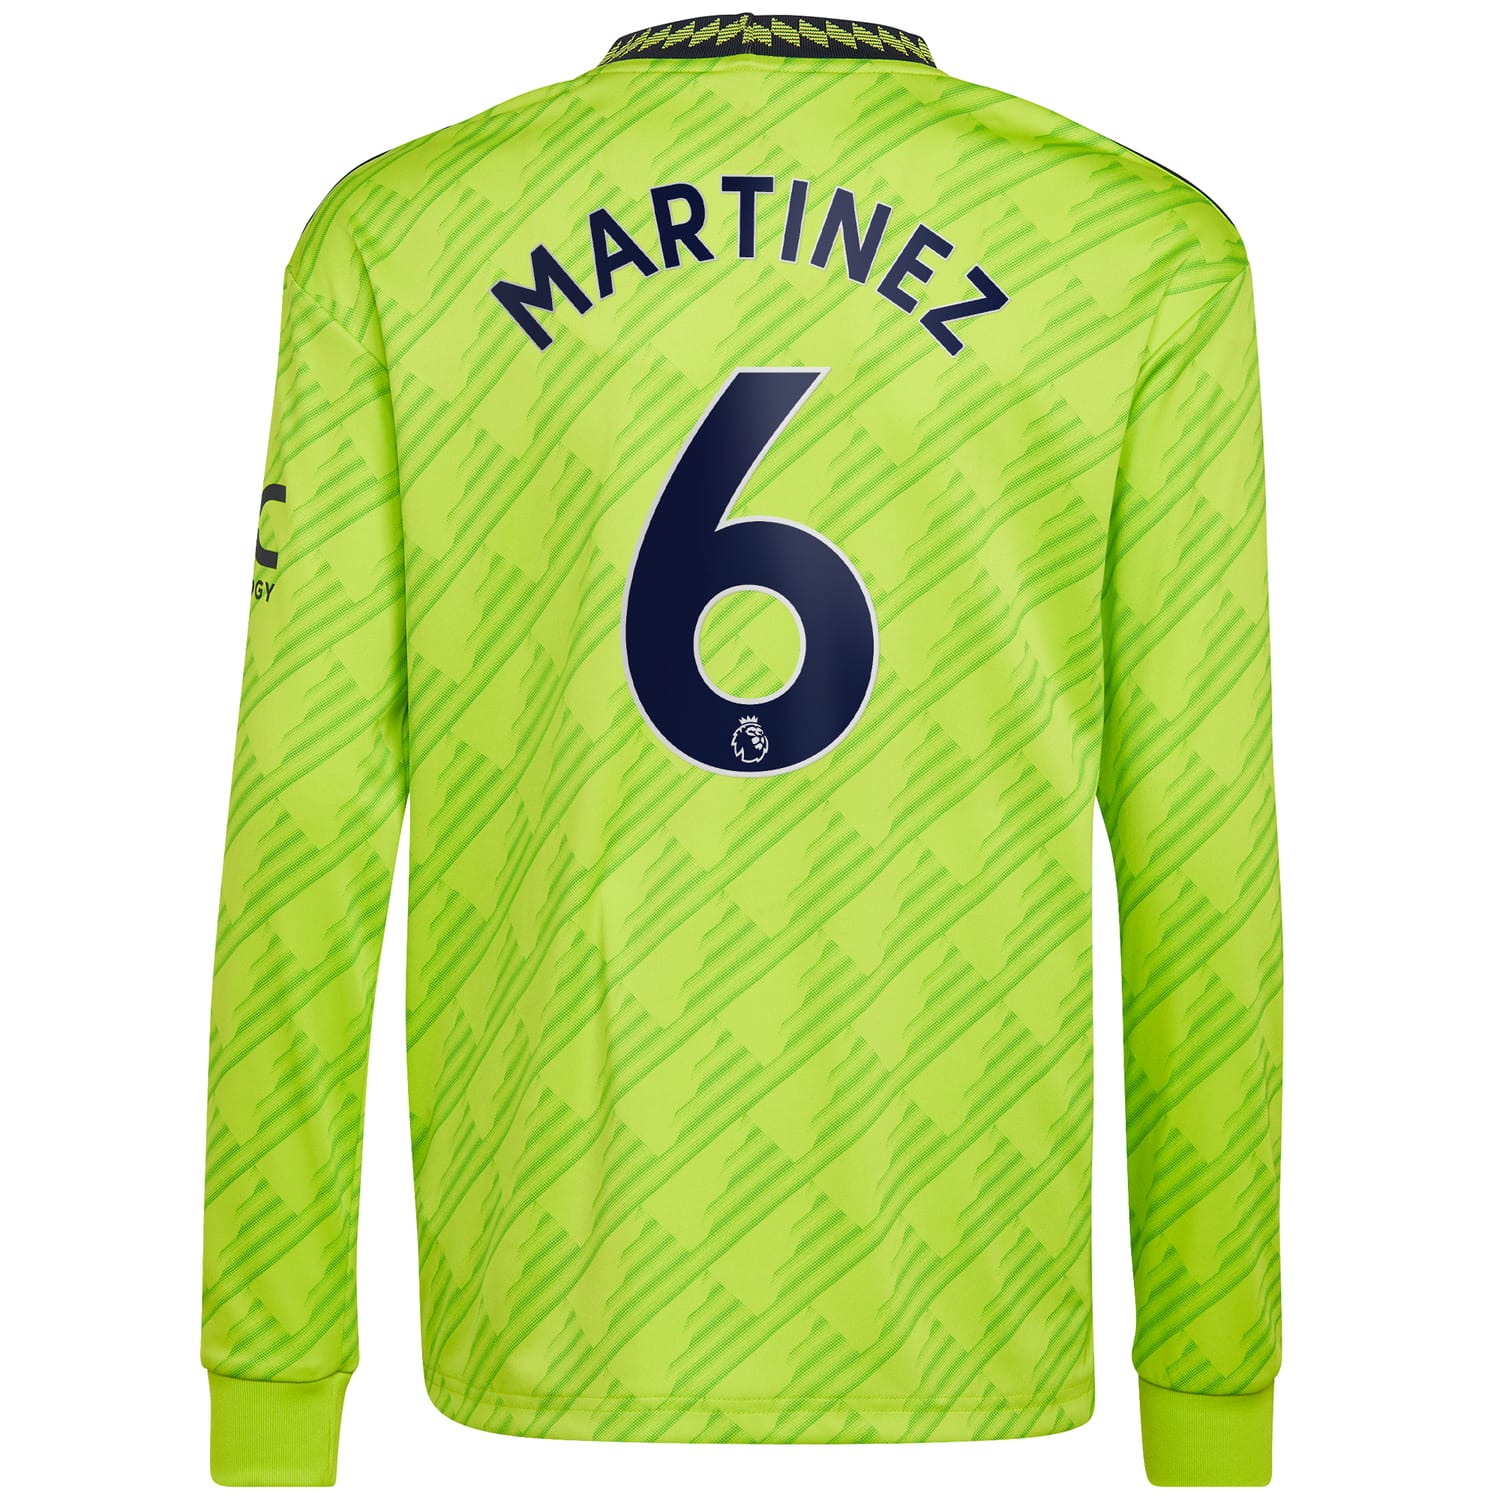 Premier League Manchester United Third Jersey Shirt Long Sleeve 2022-23 player Lisandro Martínez 6 printing for Women